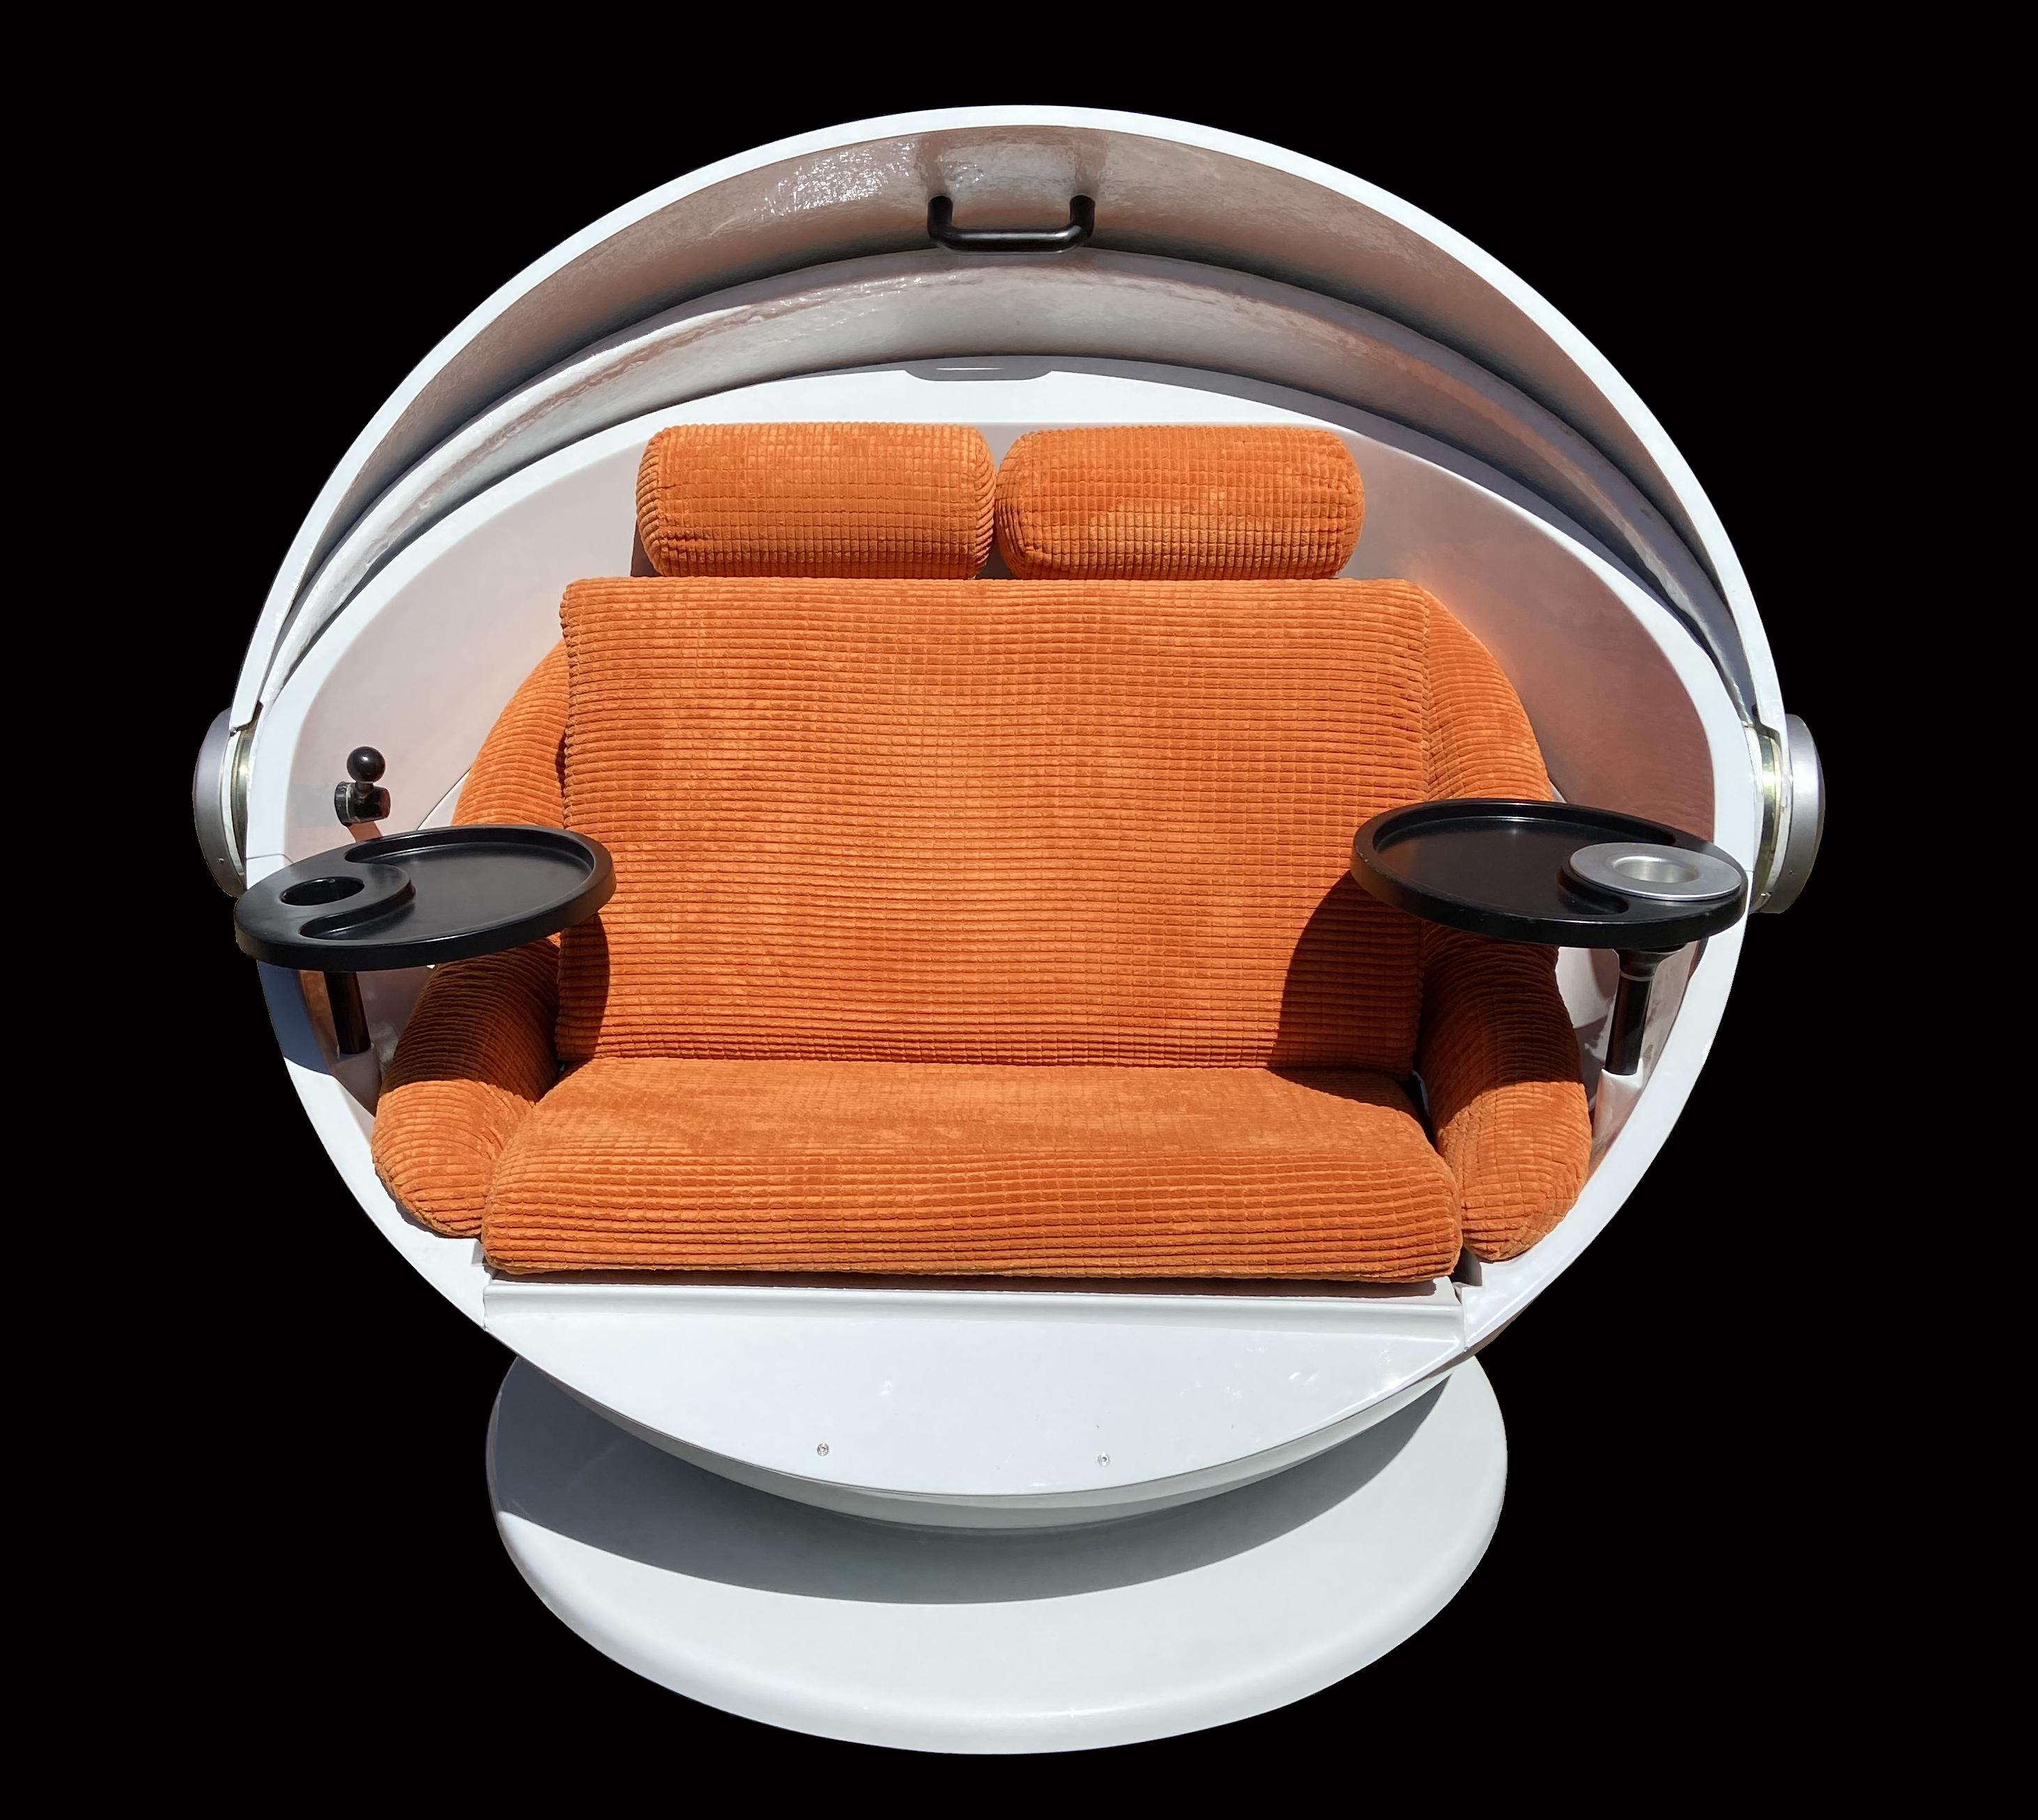 This is a fully restored original version of this 1960's iconic classic astronaut's helmet style space age outdoor swivel chair, As you can imagine, after 60 plus years, the original finish had become matte and somewhat discoloured, so it has had a